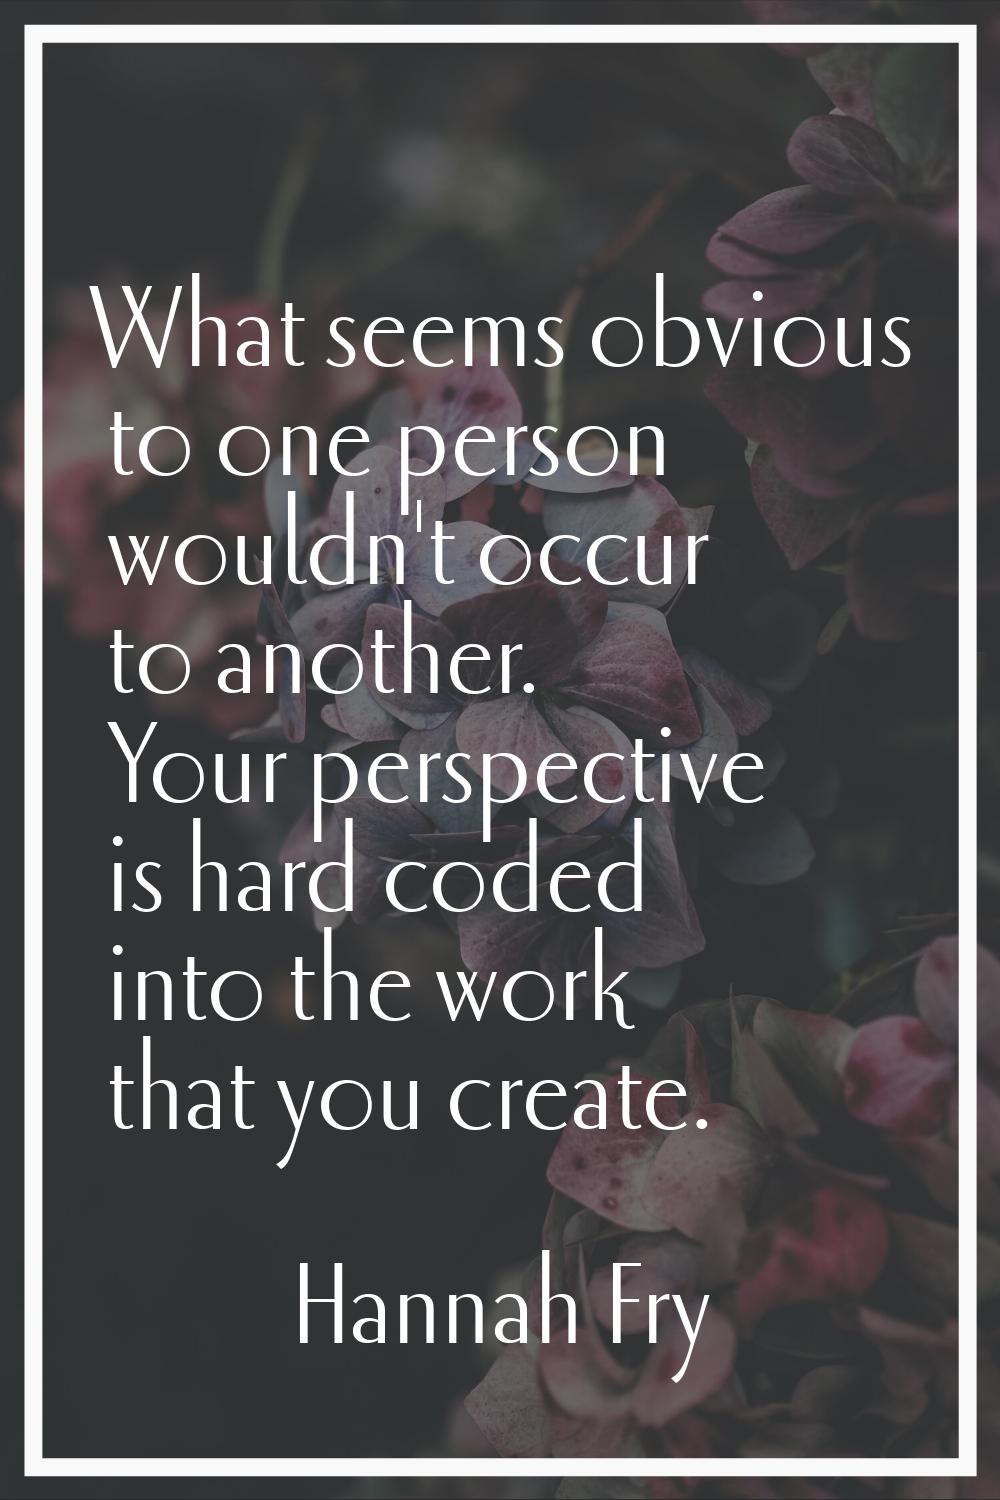 What seems obvious to one person wouldn't occur to another. Your perspective is hard coded into the